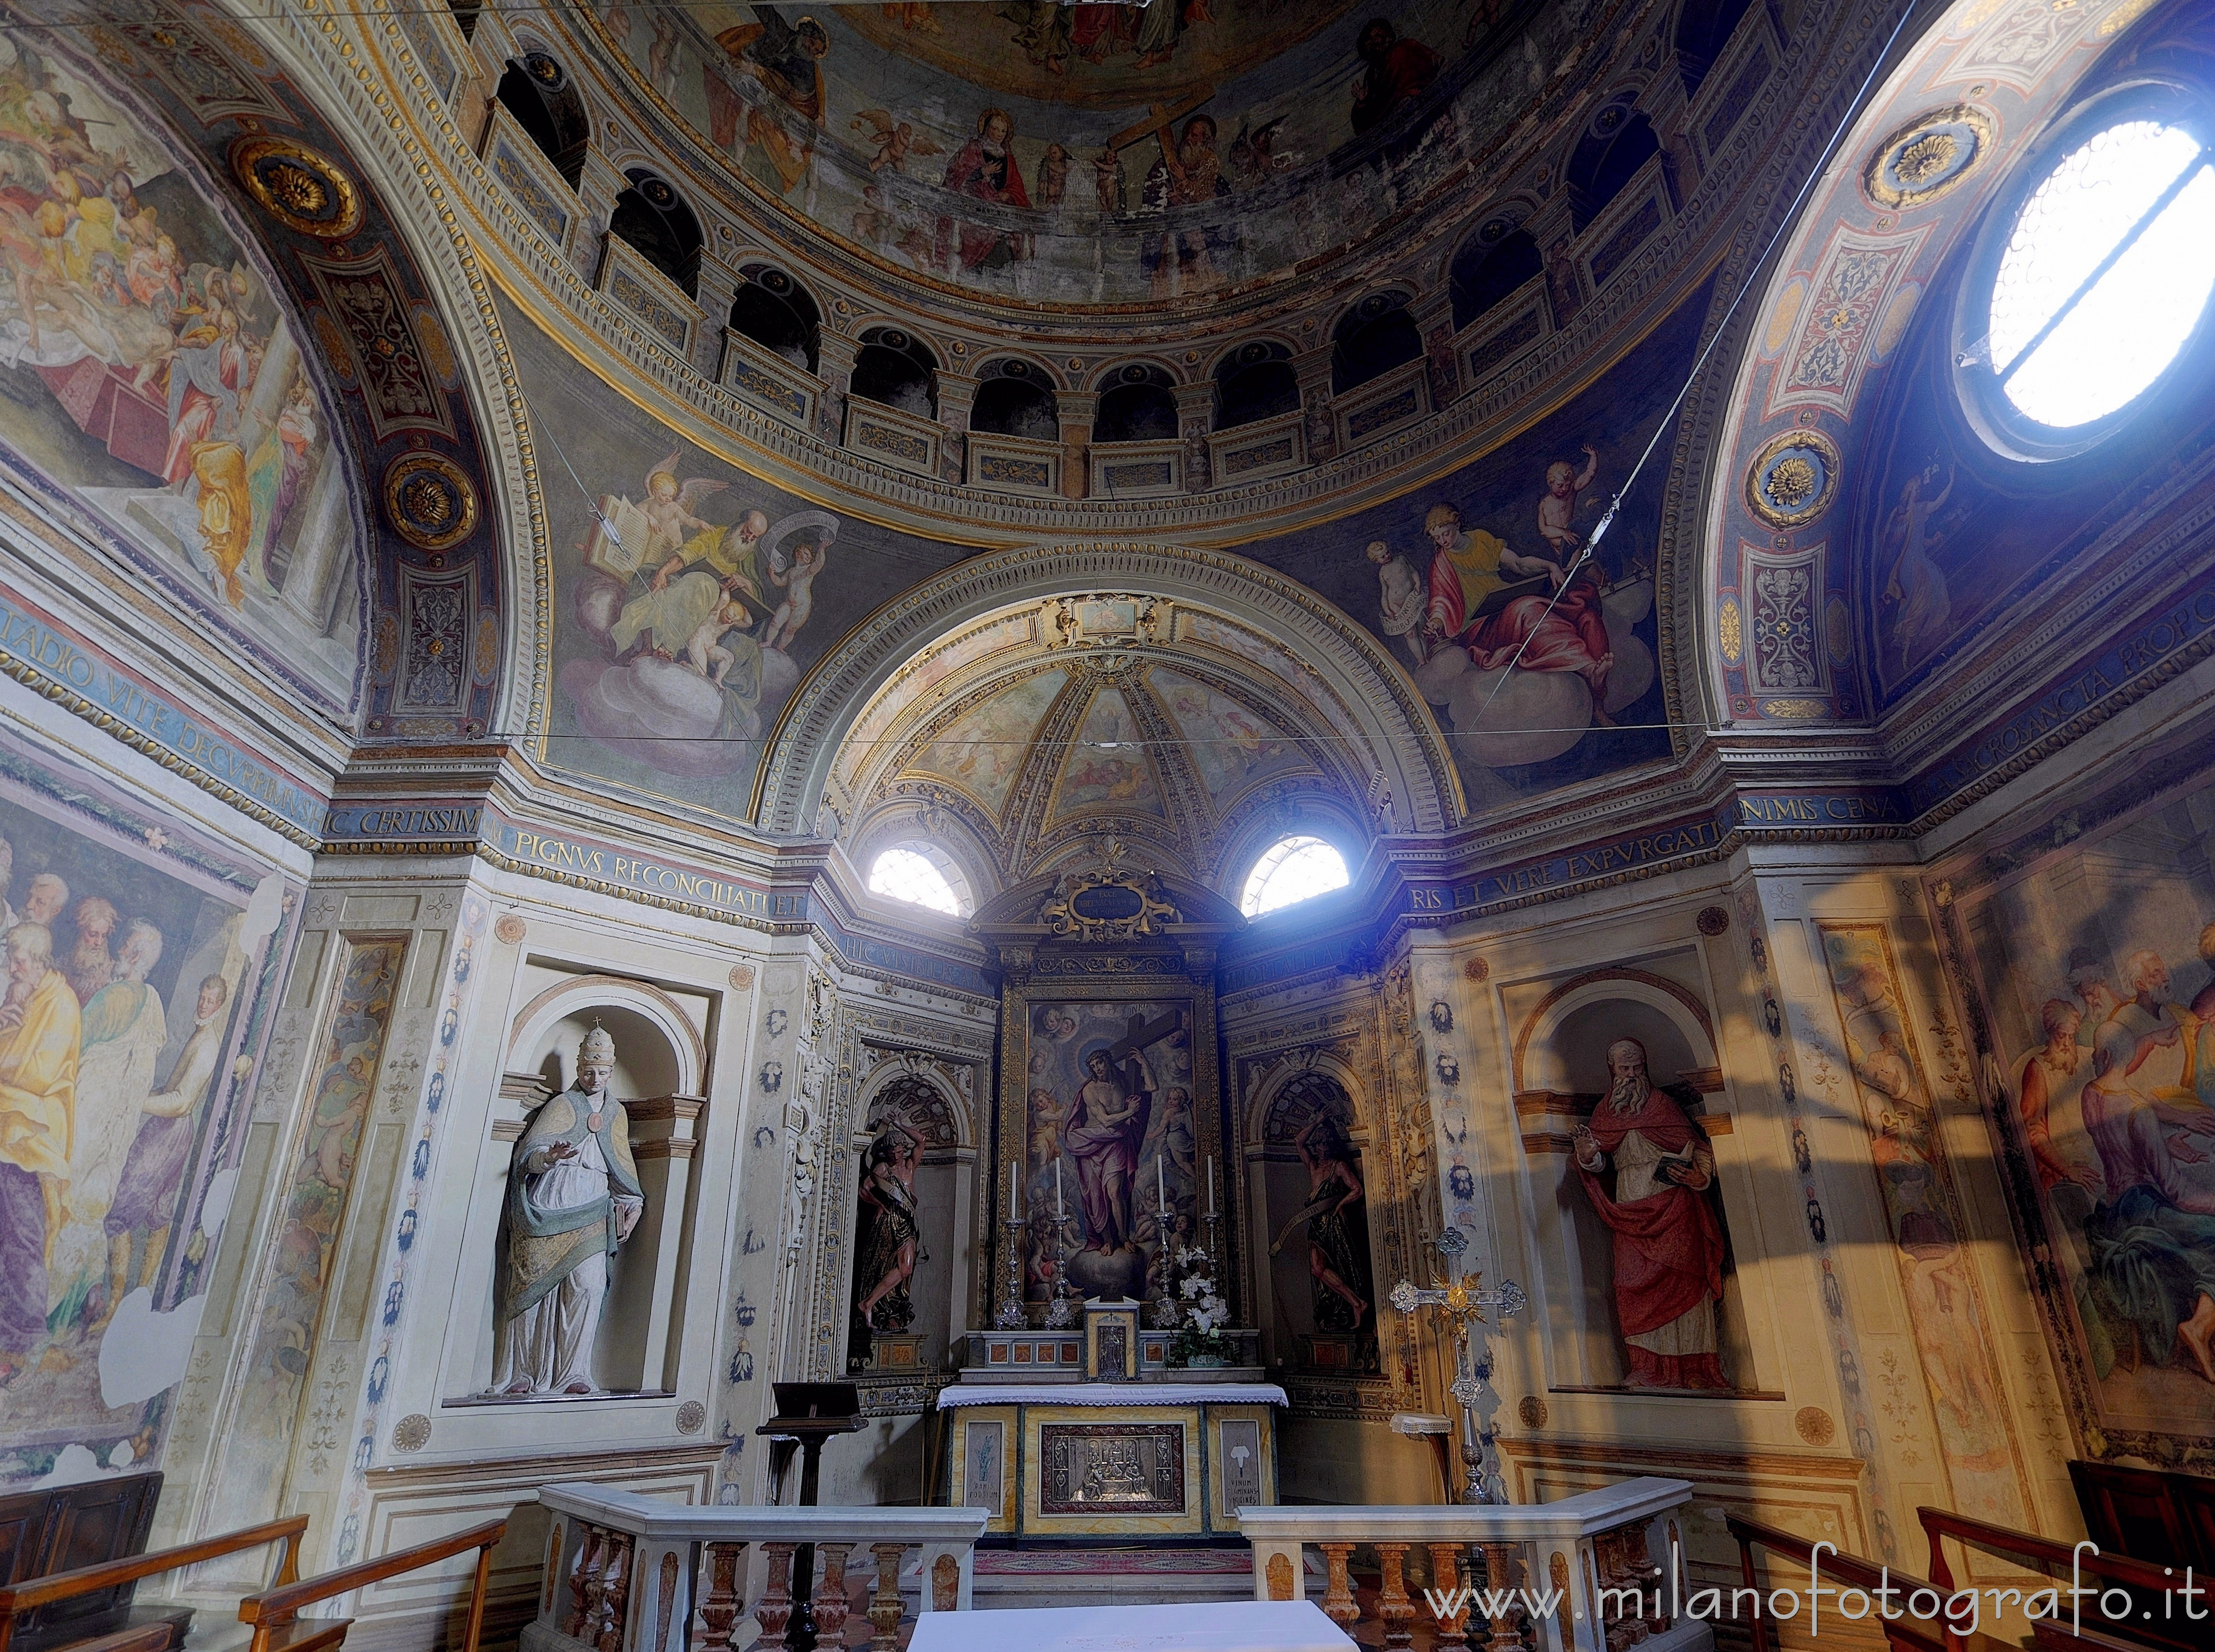 Caravaggio (Bergamo, Italy): Interior of the Chapel of the Blessed Sacrament in the Church of the Saints Fermo and Rustico - Caravaggio (Bergamo, Italy)